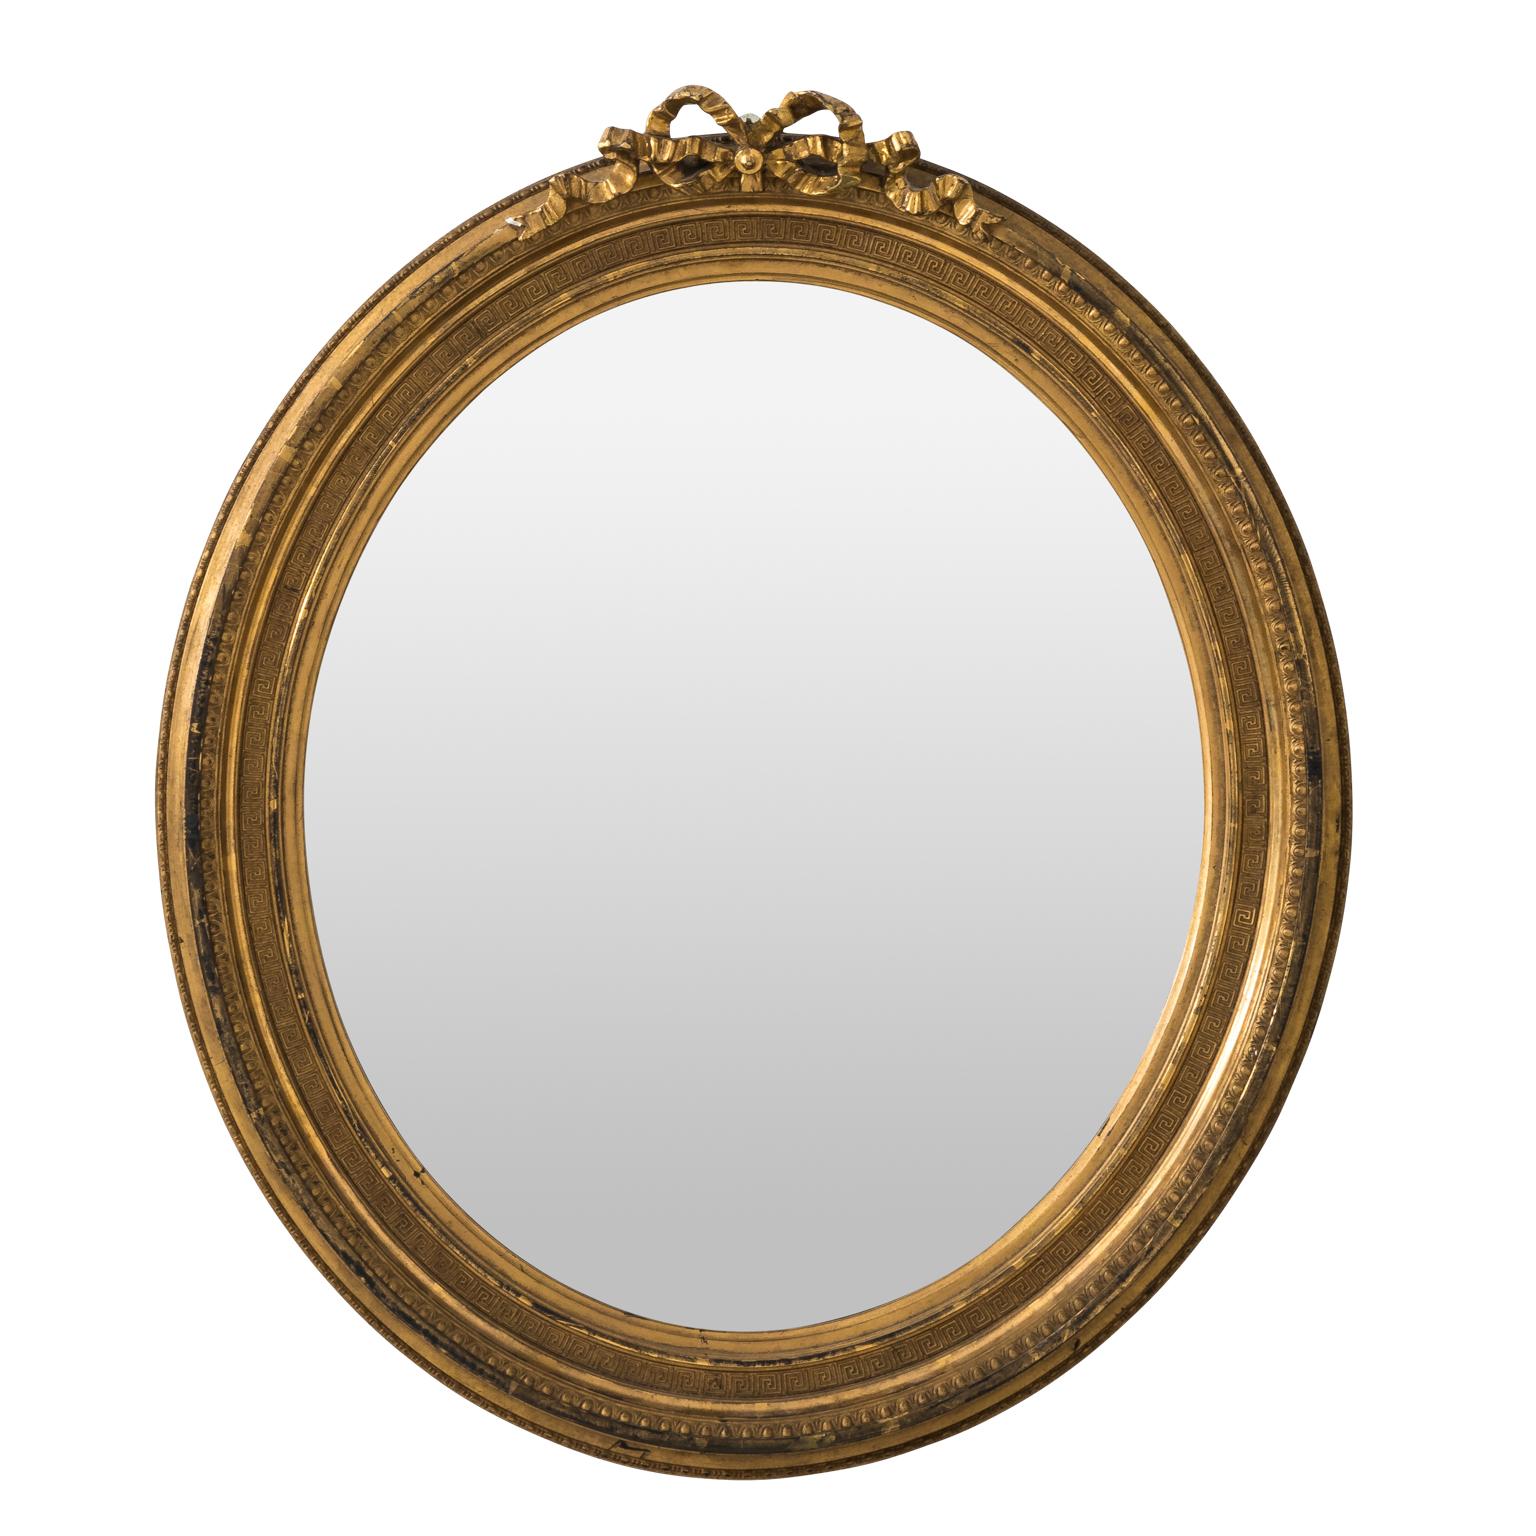 Late 19th Century French Oval Gilt Mirror